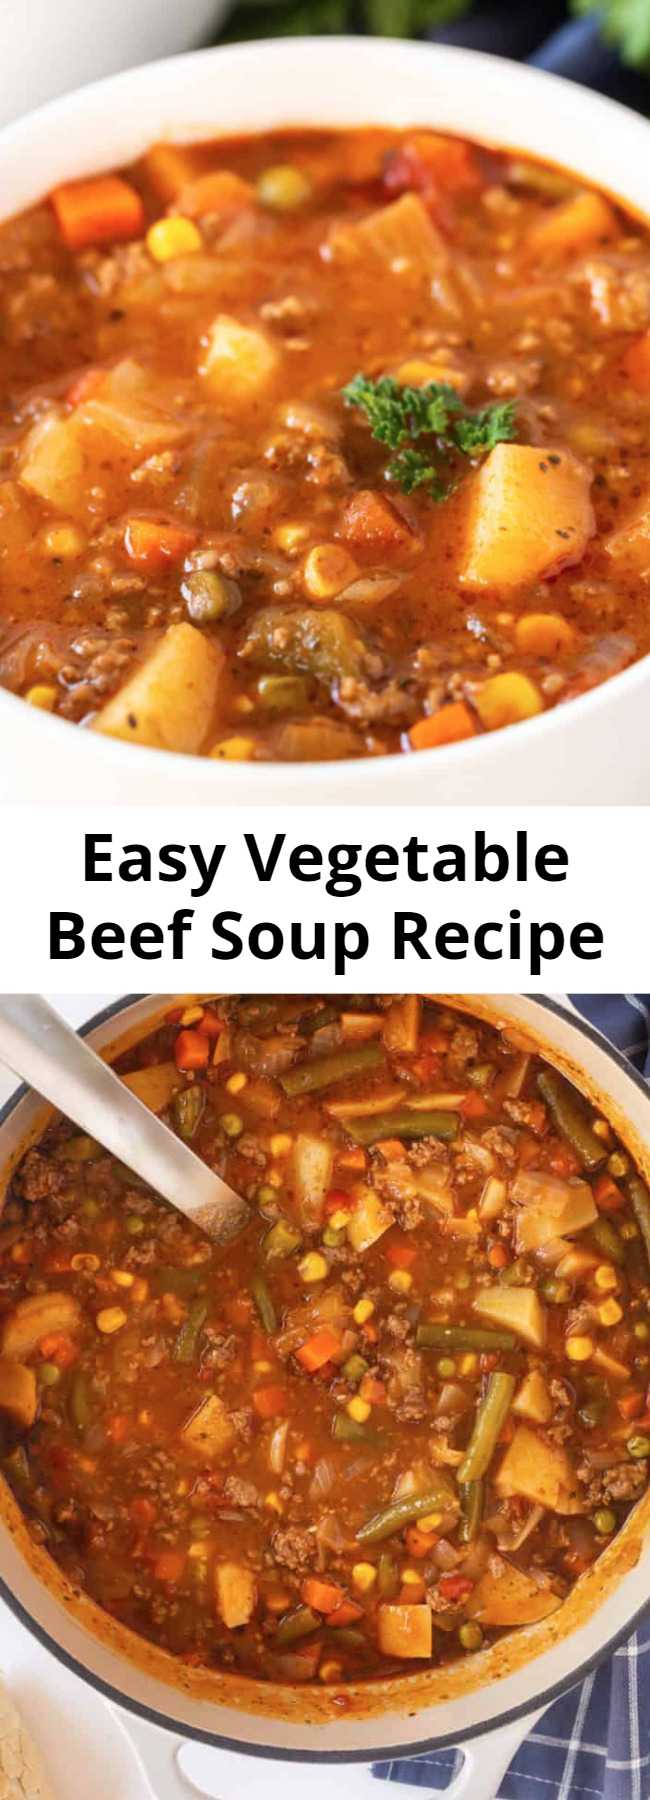 Easy Vegetable Beef Soup Recipe - When it comes to comfort this Vegetable Beef Soup is where it's at. With a short list of ingredients this easy soup is delicious, hearty and satisfies the family! #soup #beef #hearty #recipes #delicious #recipe #tasty #easyrecipe